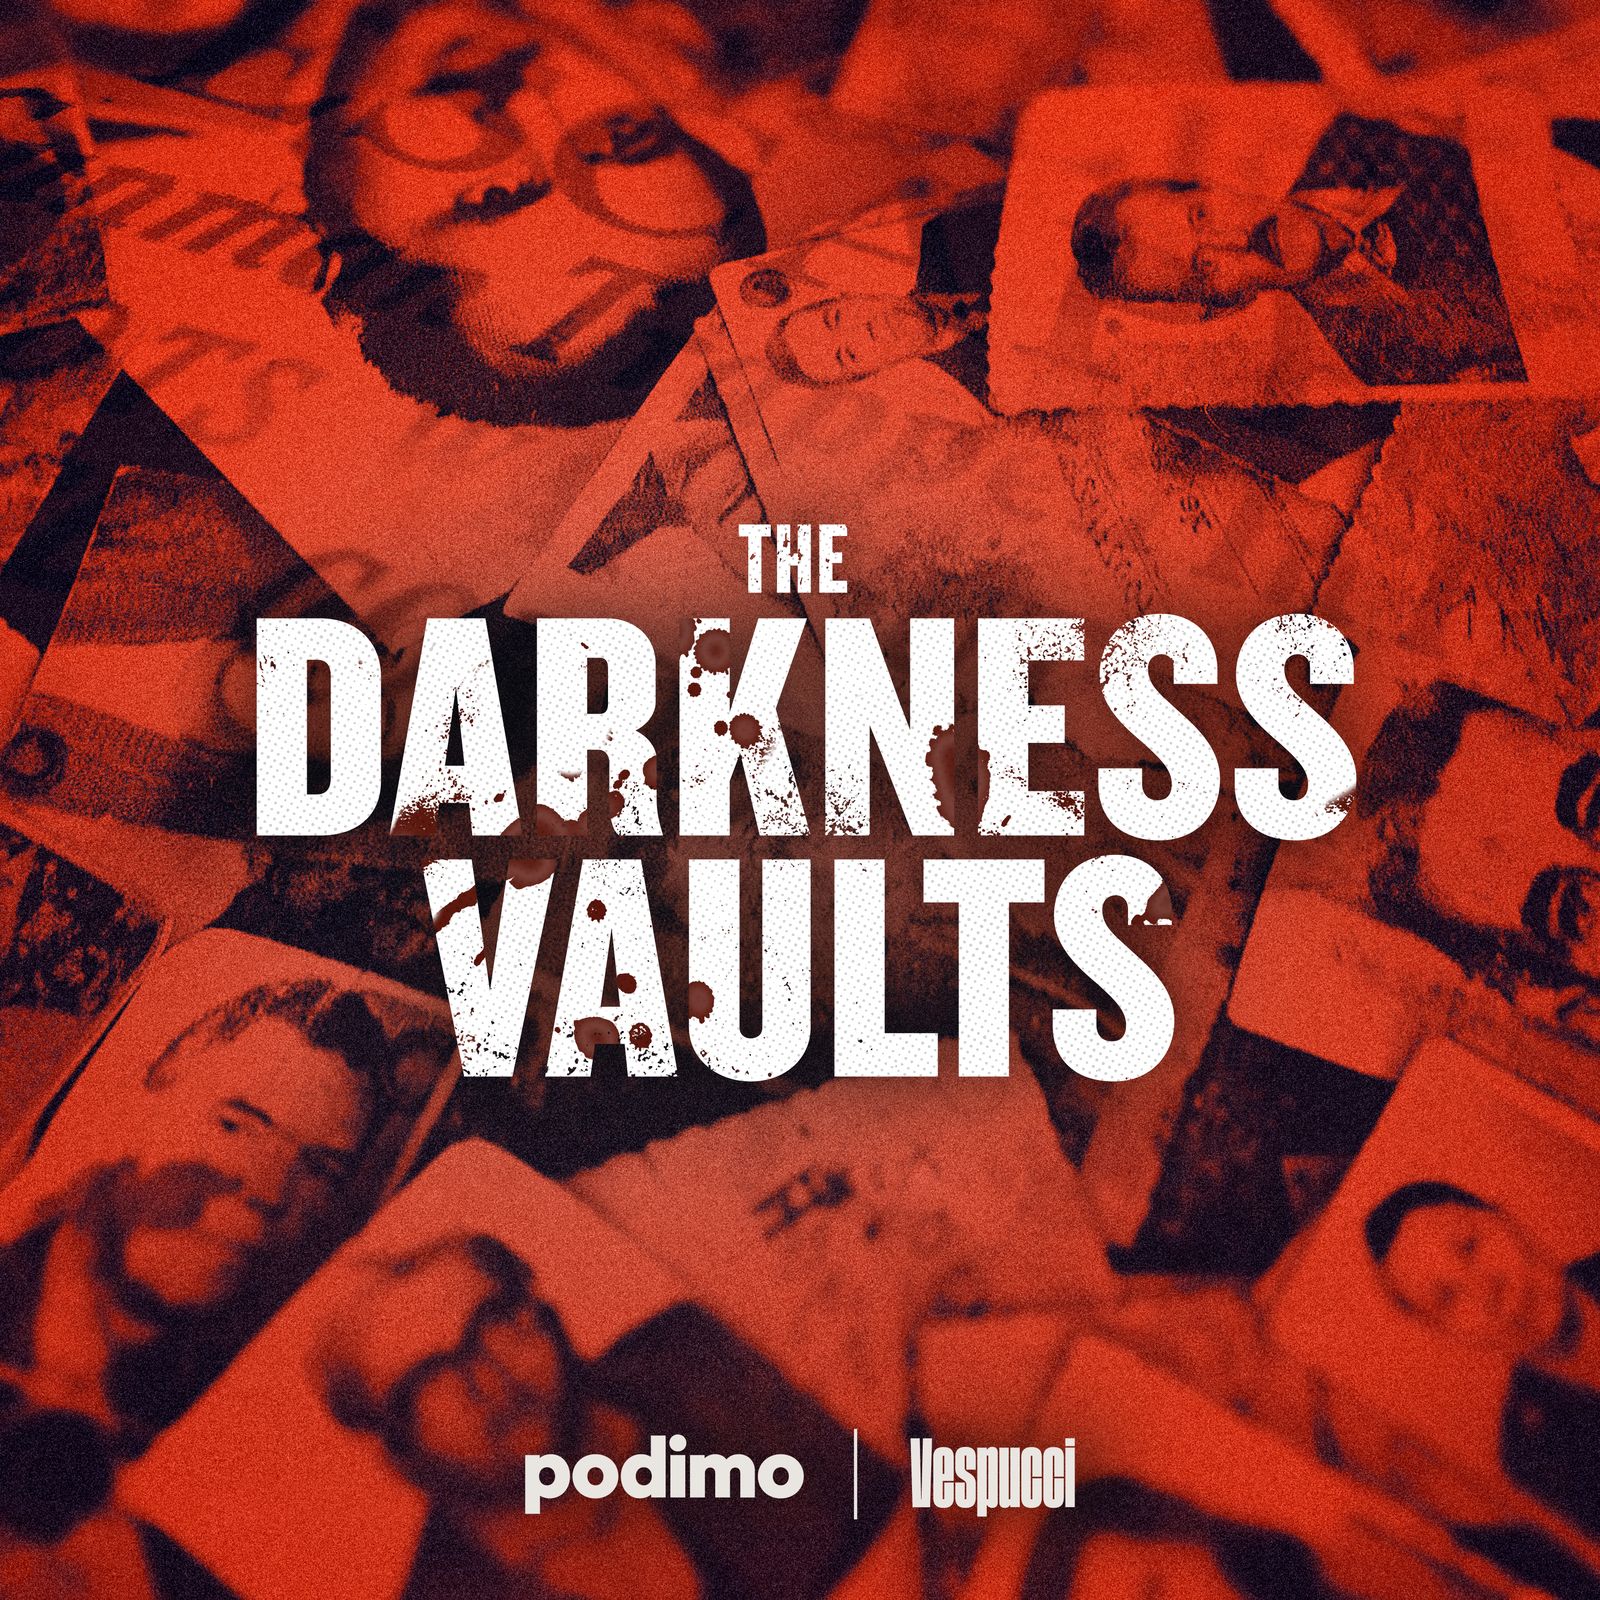 Introducing: The Darkness Vaults